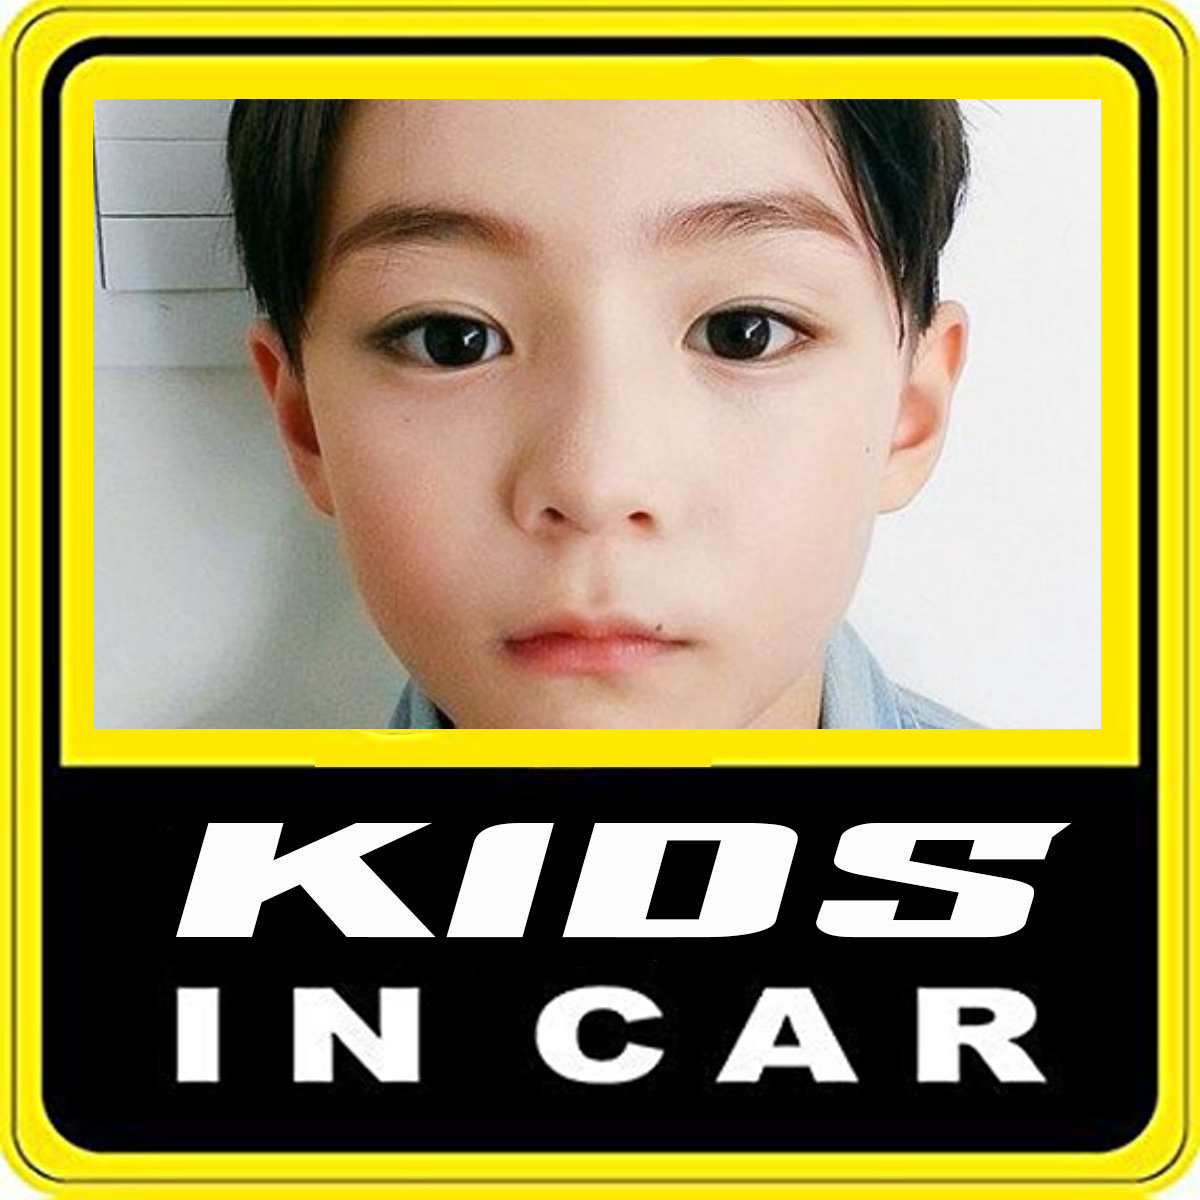 Personalised KIDS IN CAR Safety Sticker Car Vinyl Stickers Decals Accessories